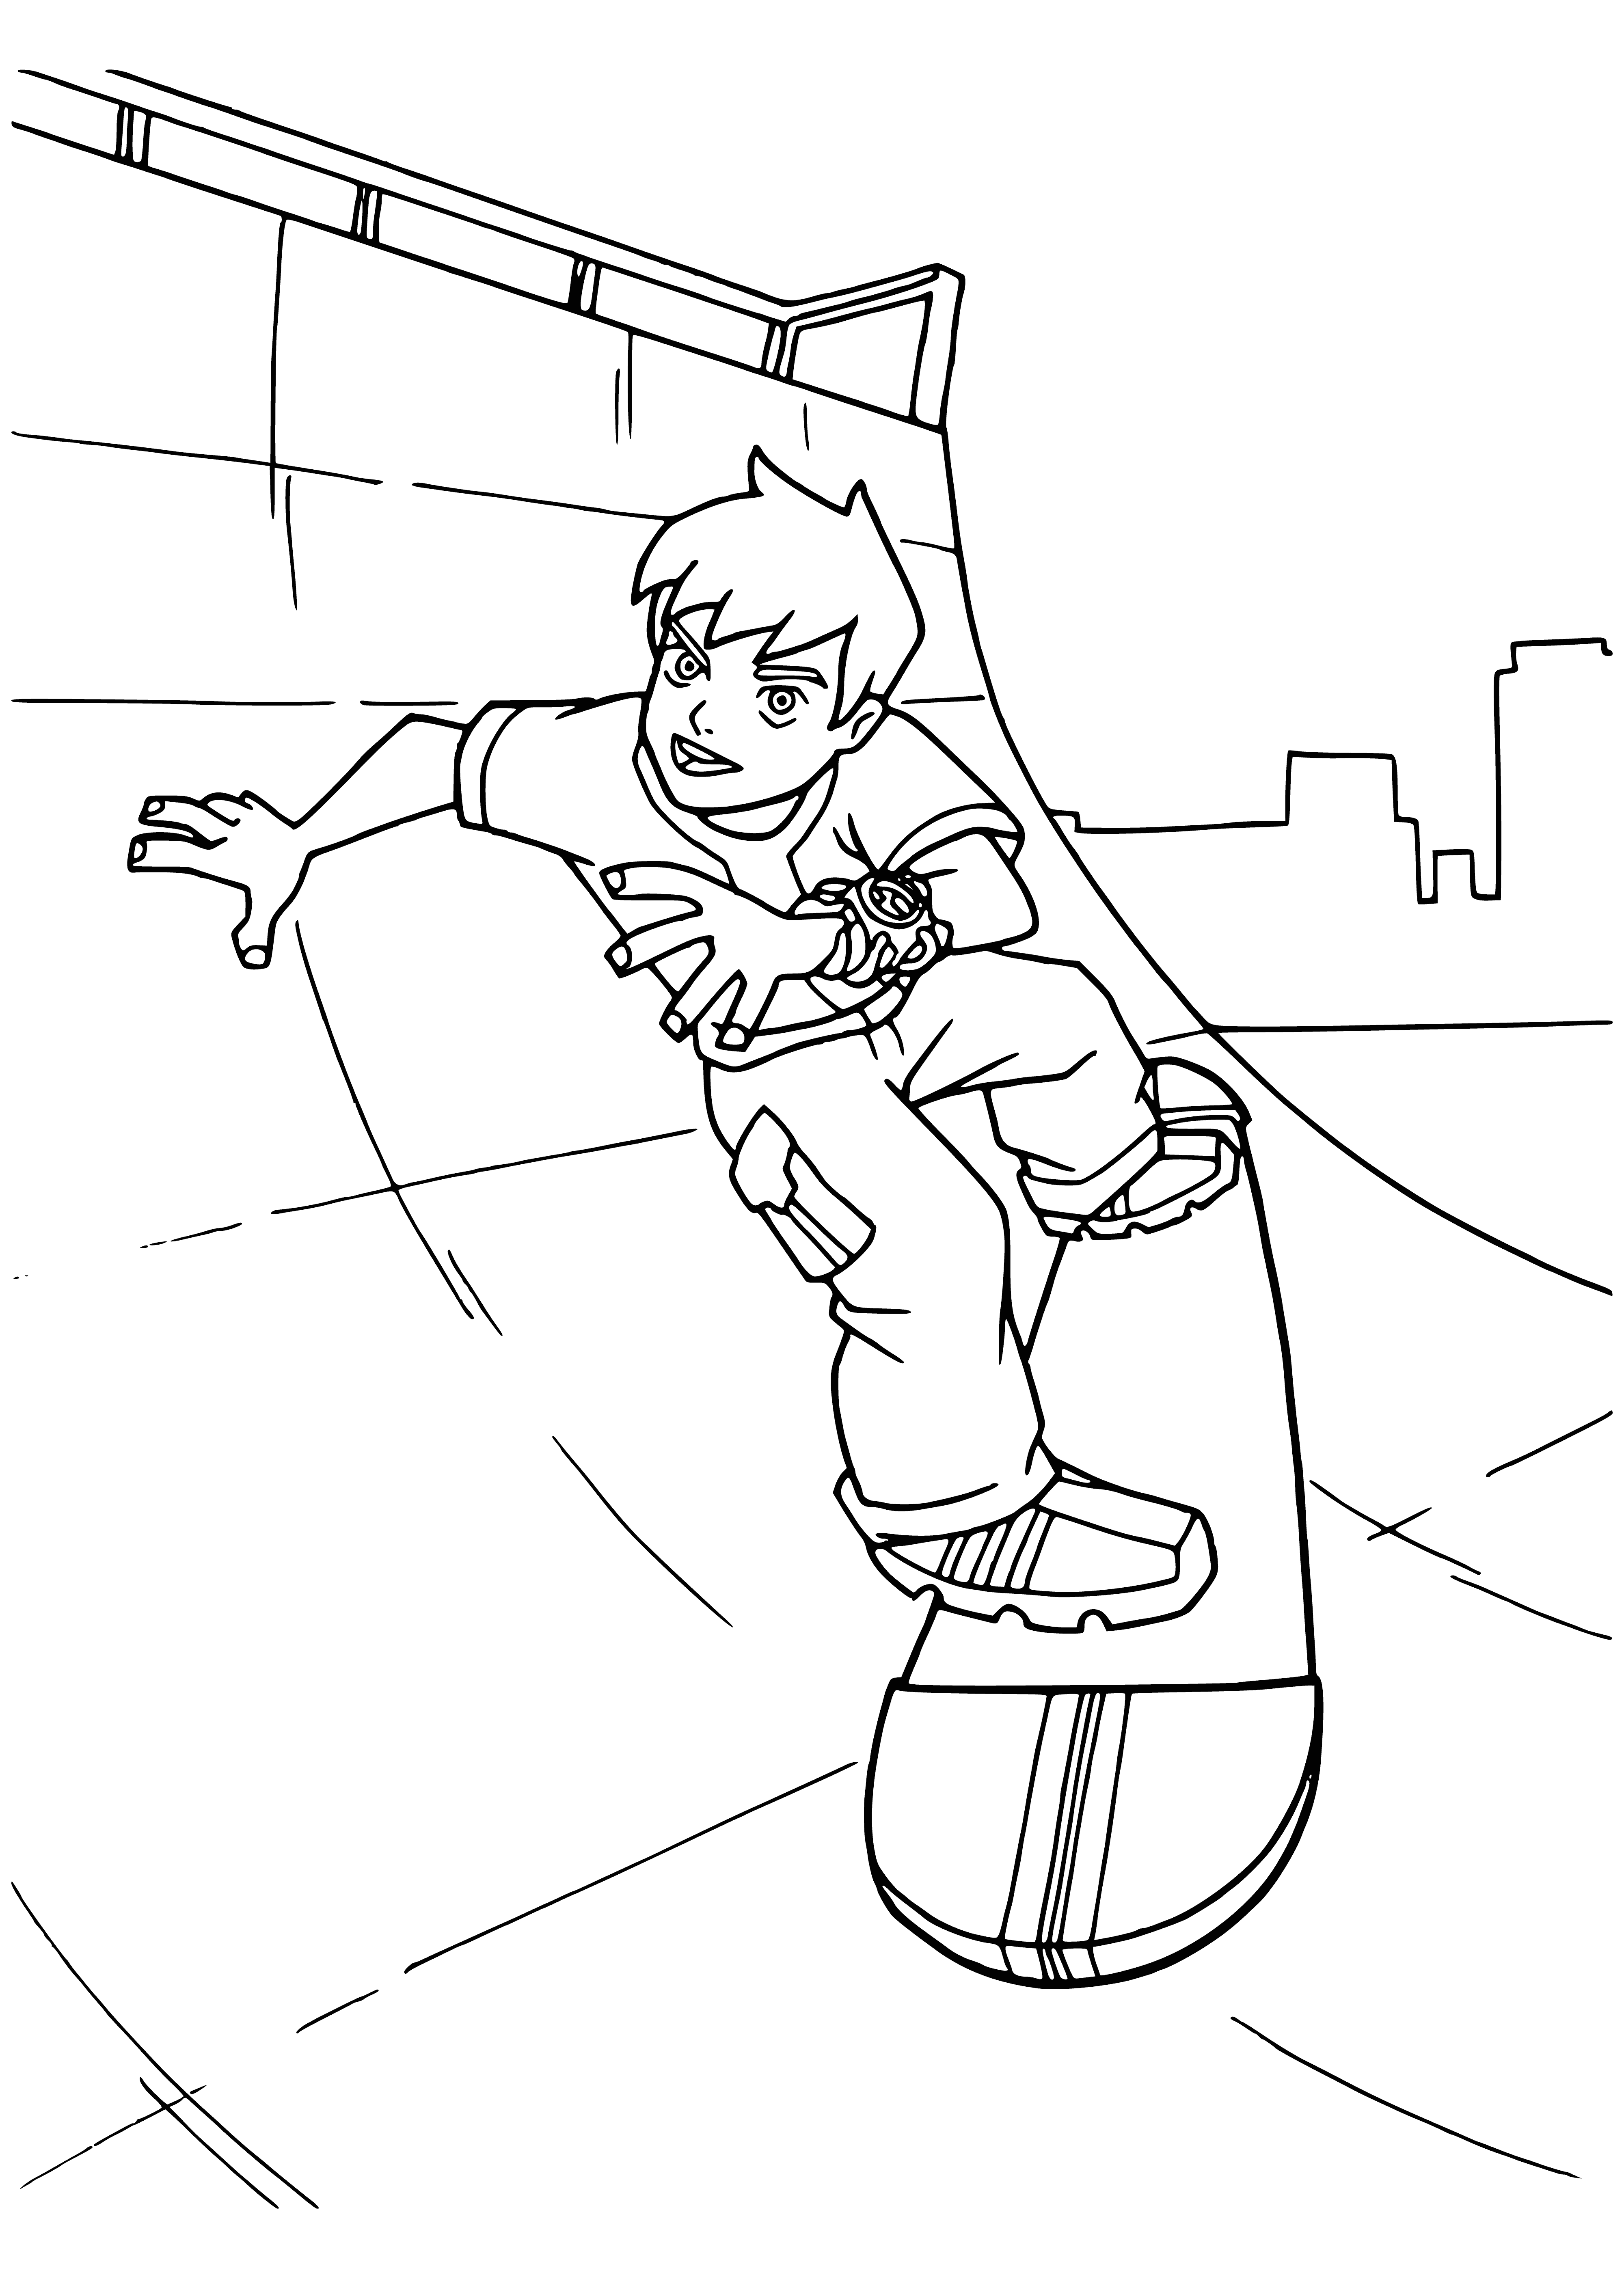 Skateboarder coloring page